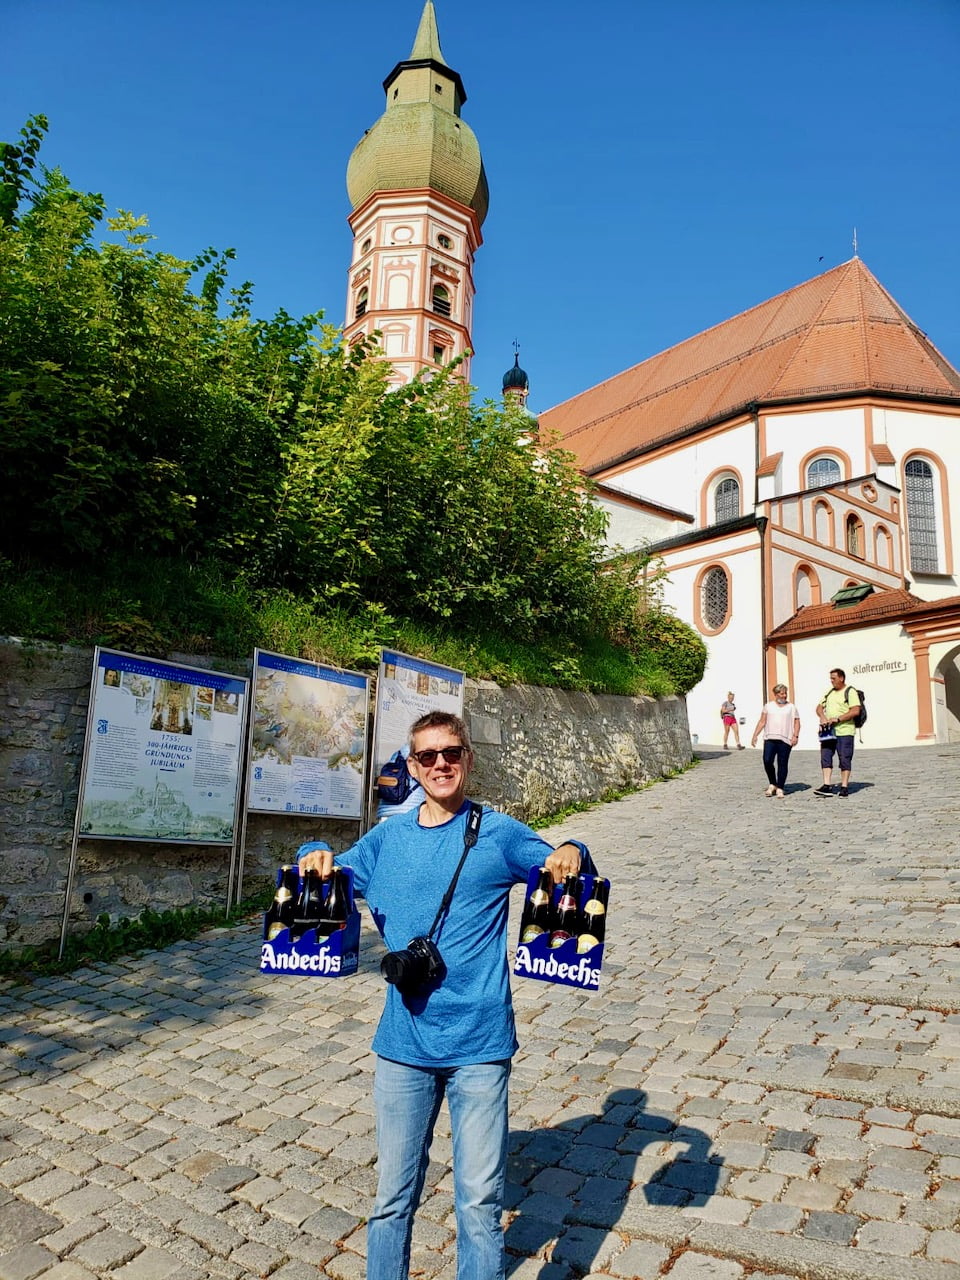 Me with Andechs beer